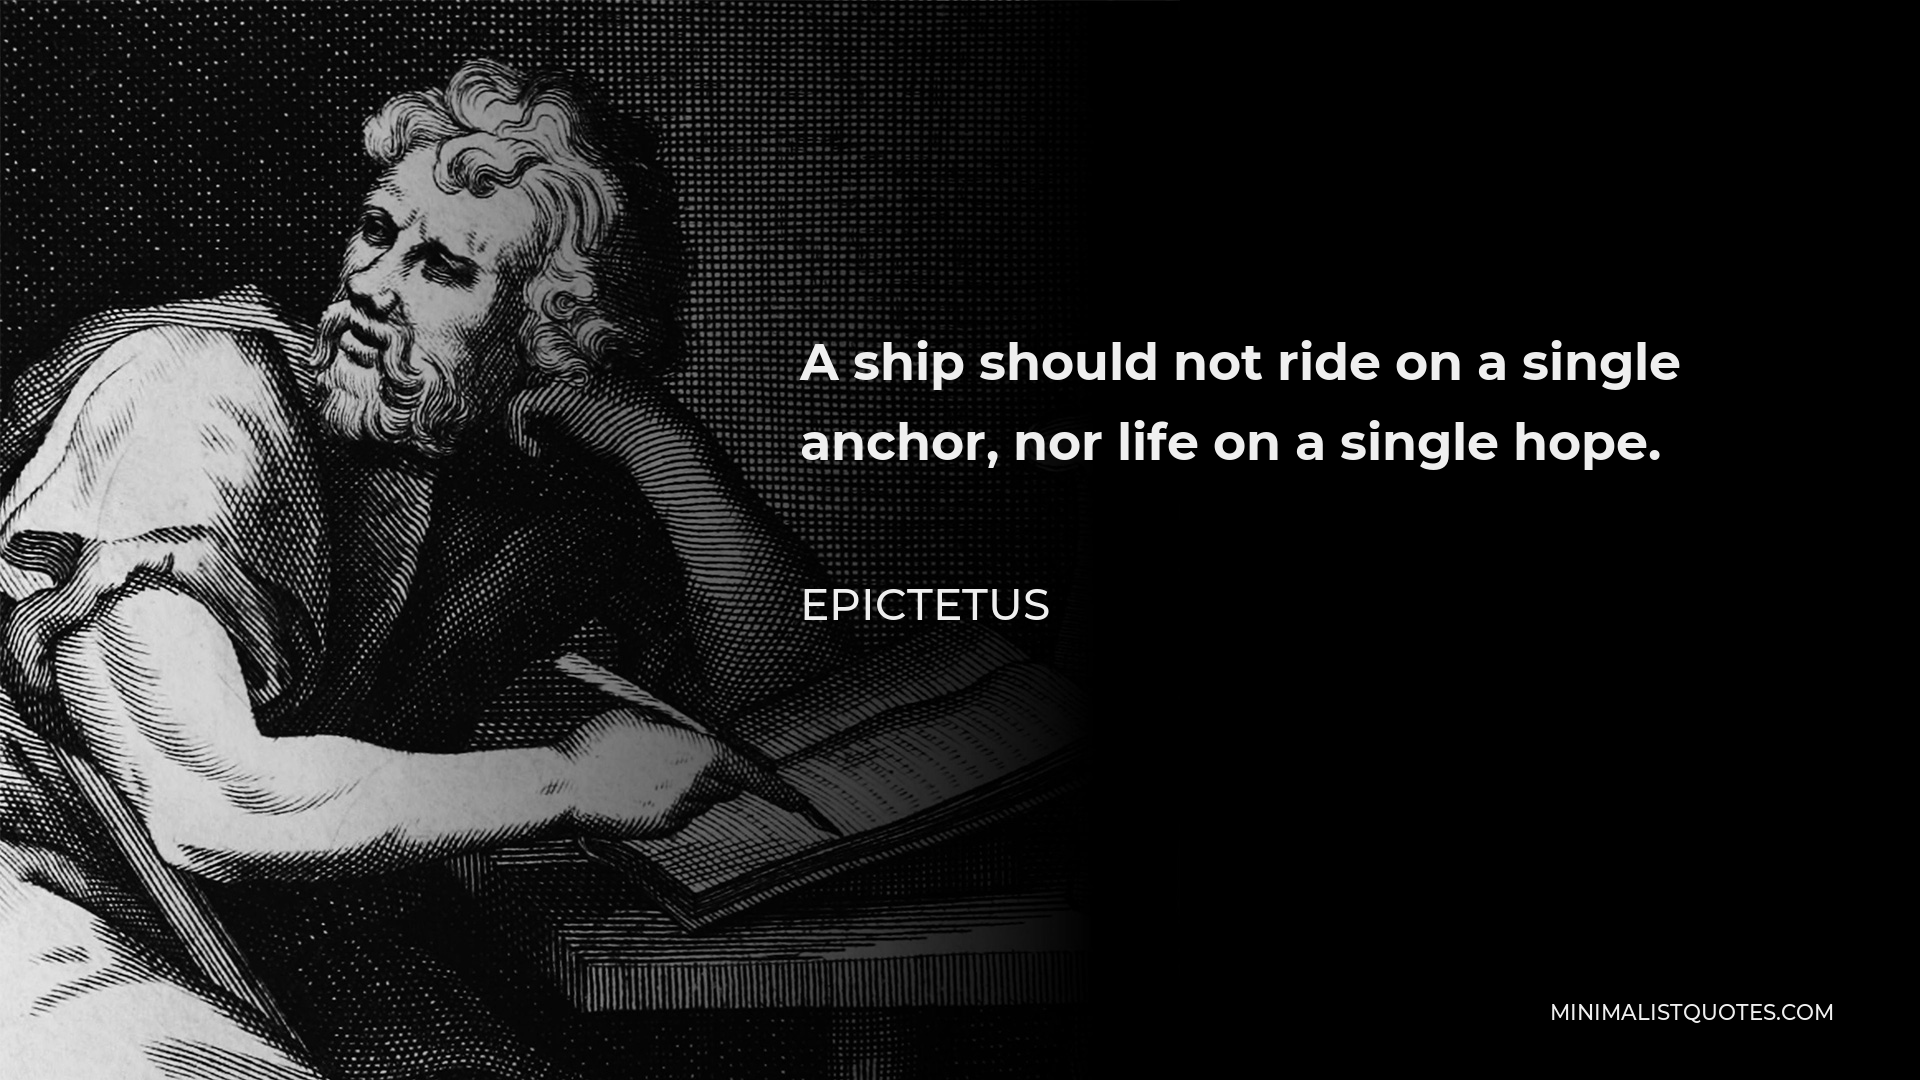 Epictetus Quote - A ship should not ride on a single anchor, nor life on a single hope.